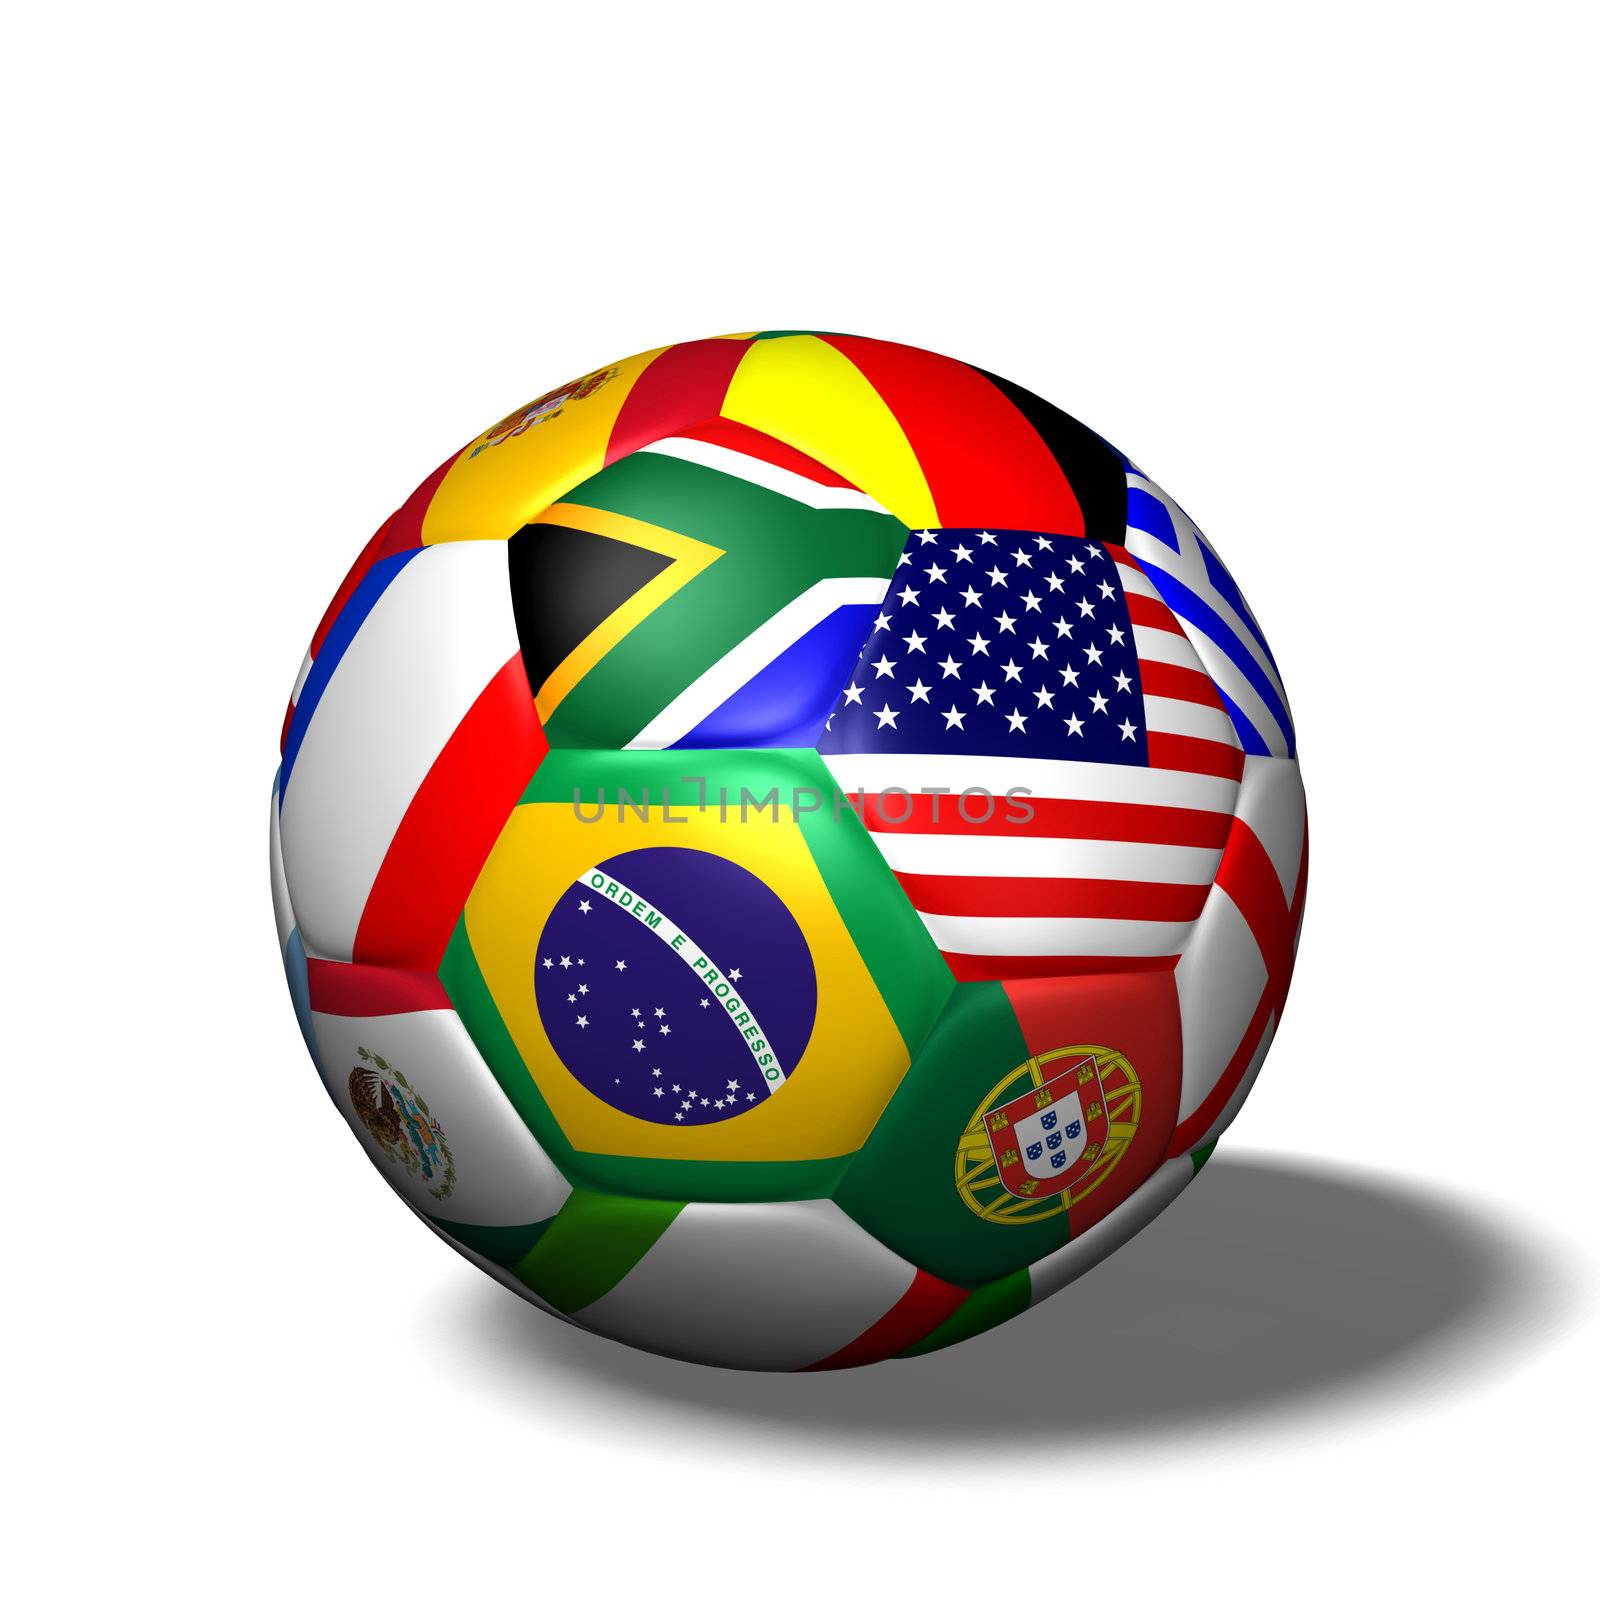 Image of a soccer ball with flags from various countries isolated on a white background.